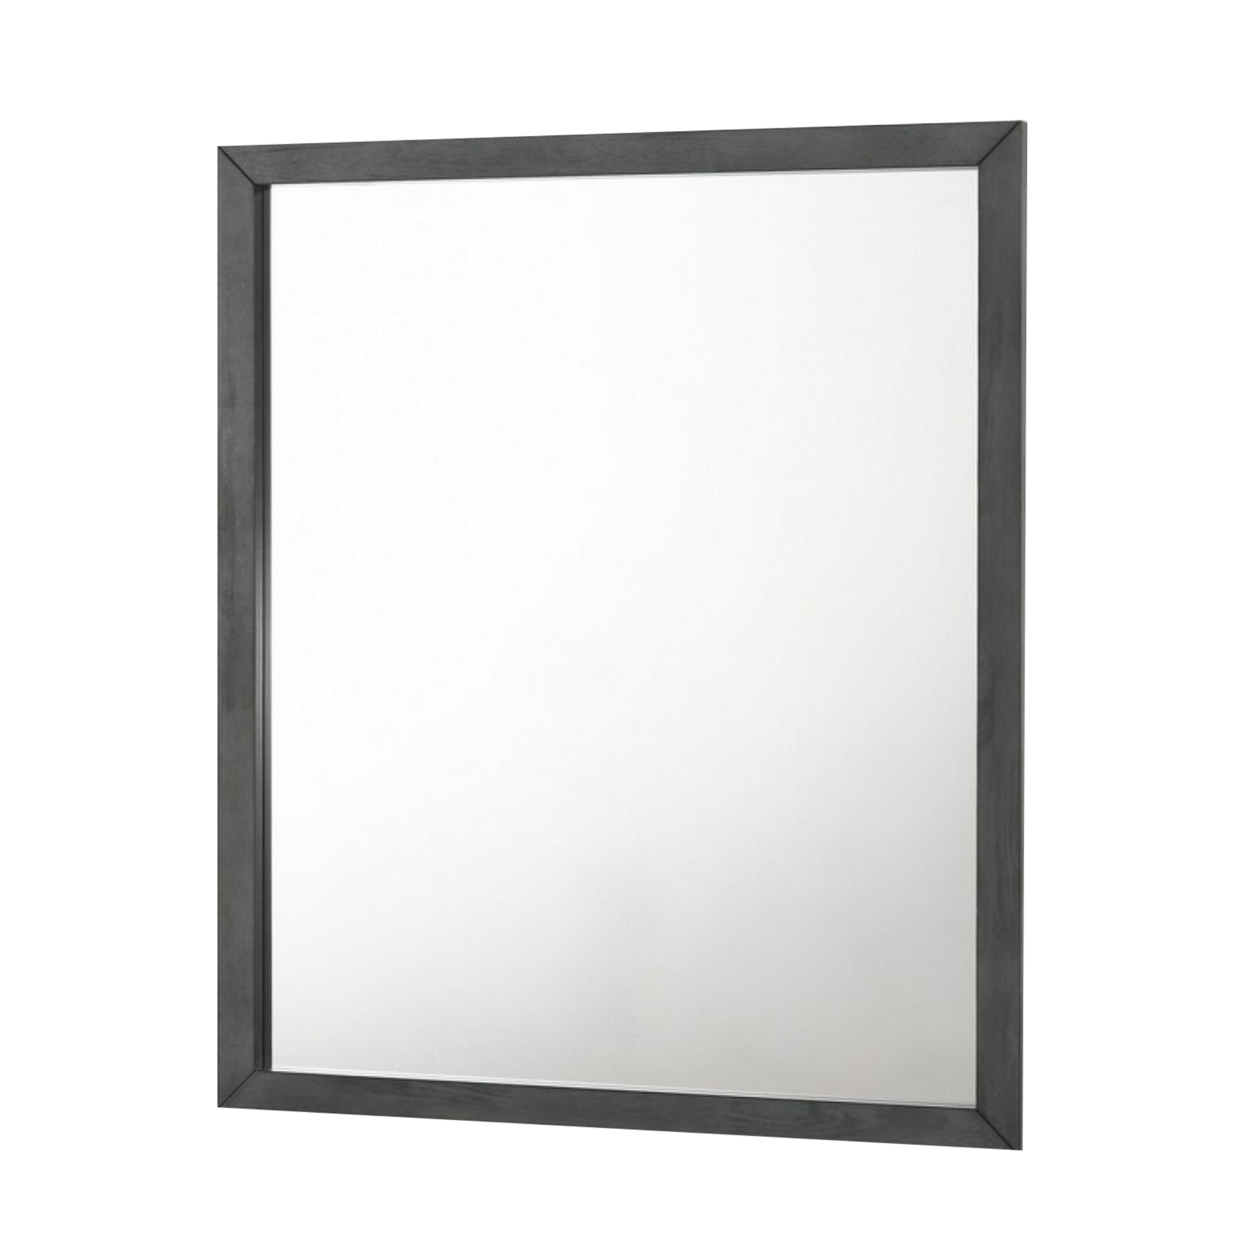 Wall Mirror With Rectangle Frame And Natural Wood Grain Details, Gray- Saltoro Sherpi